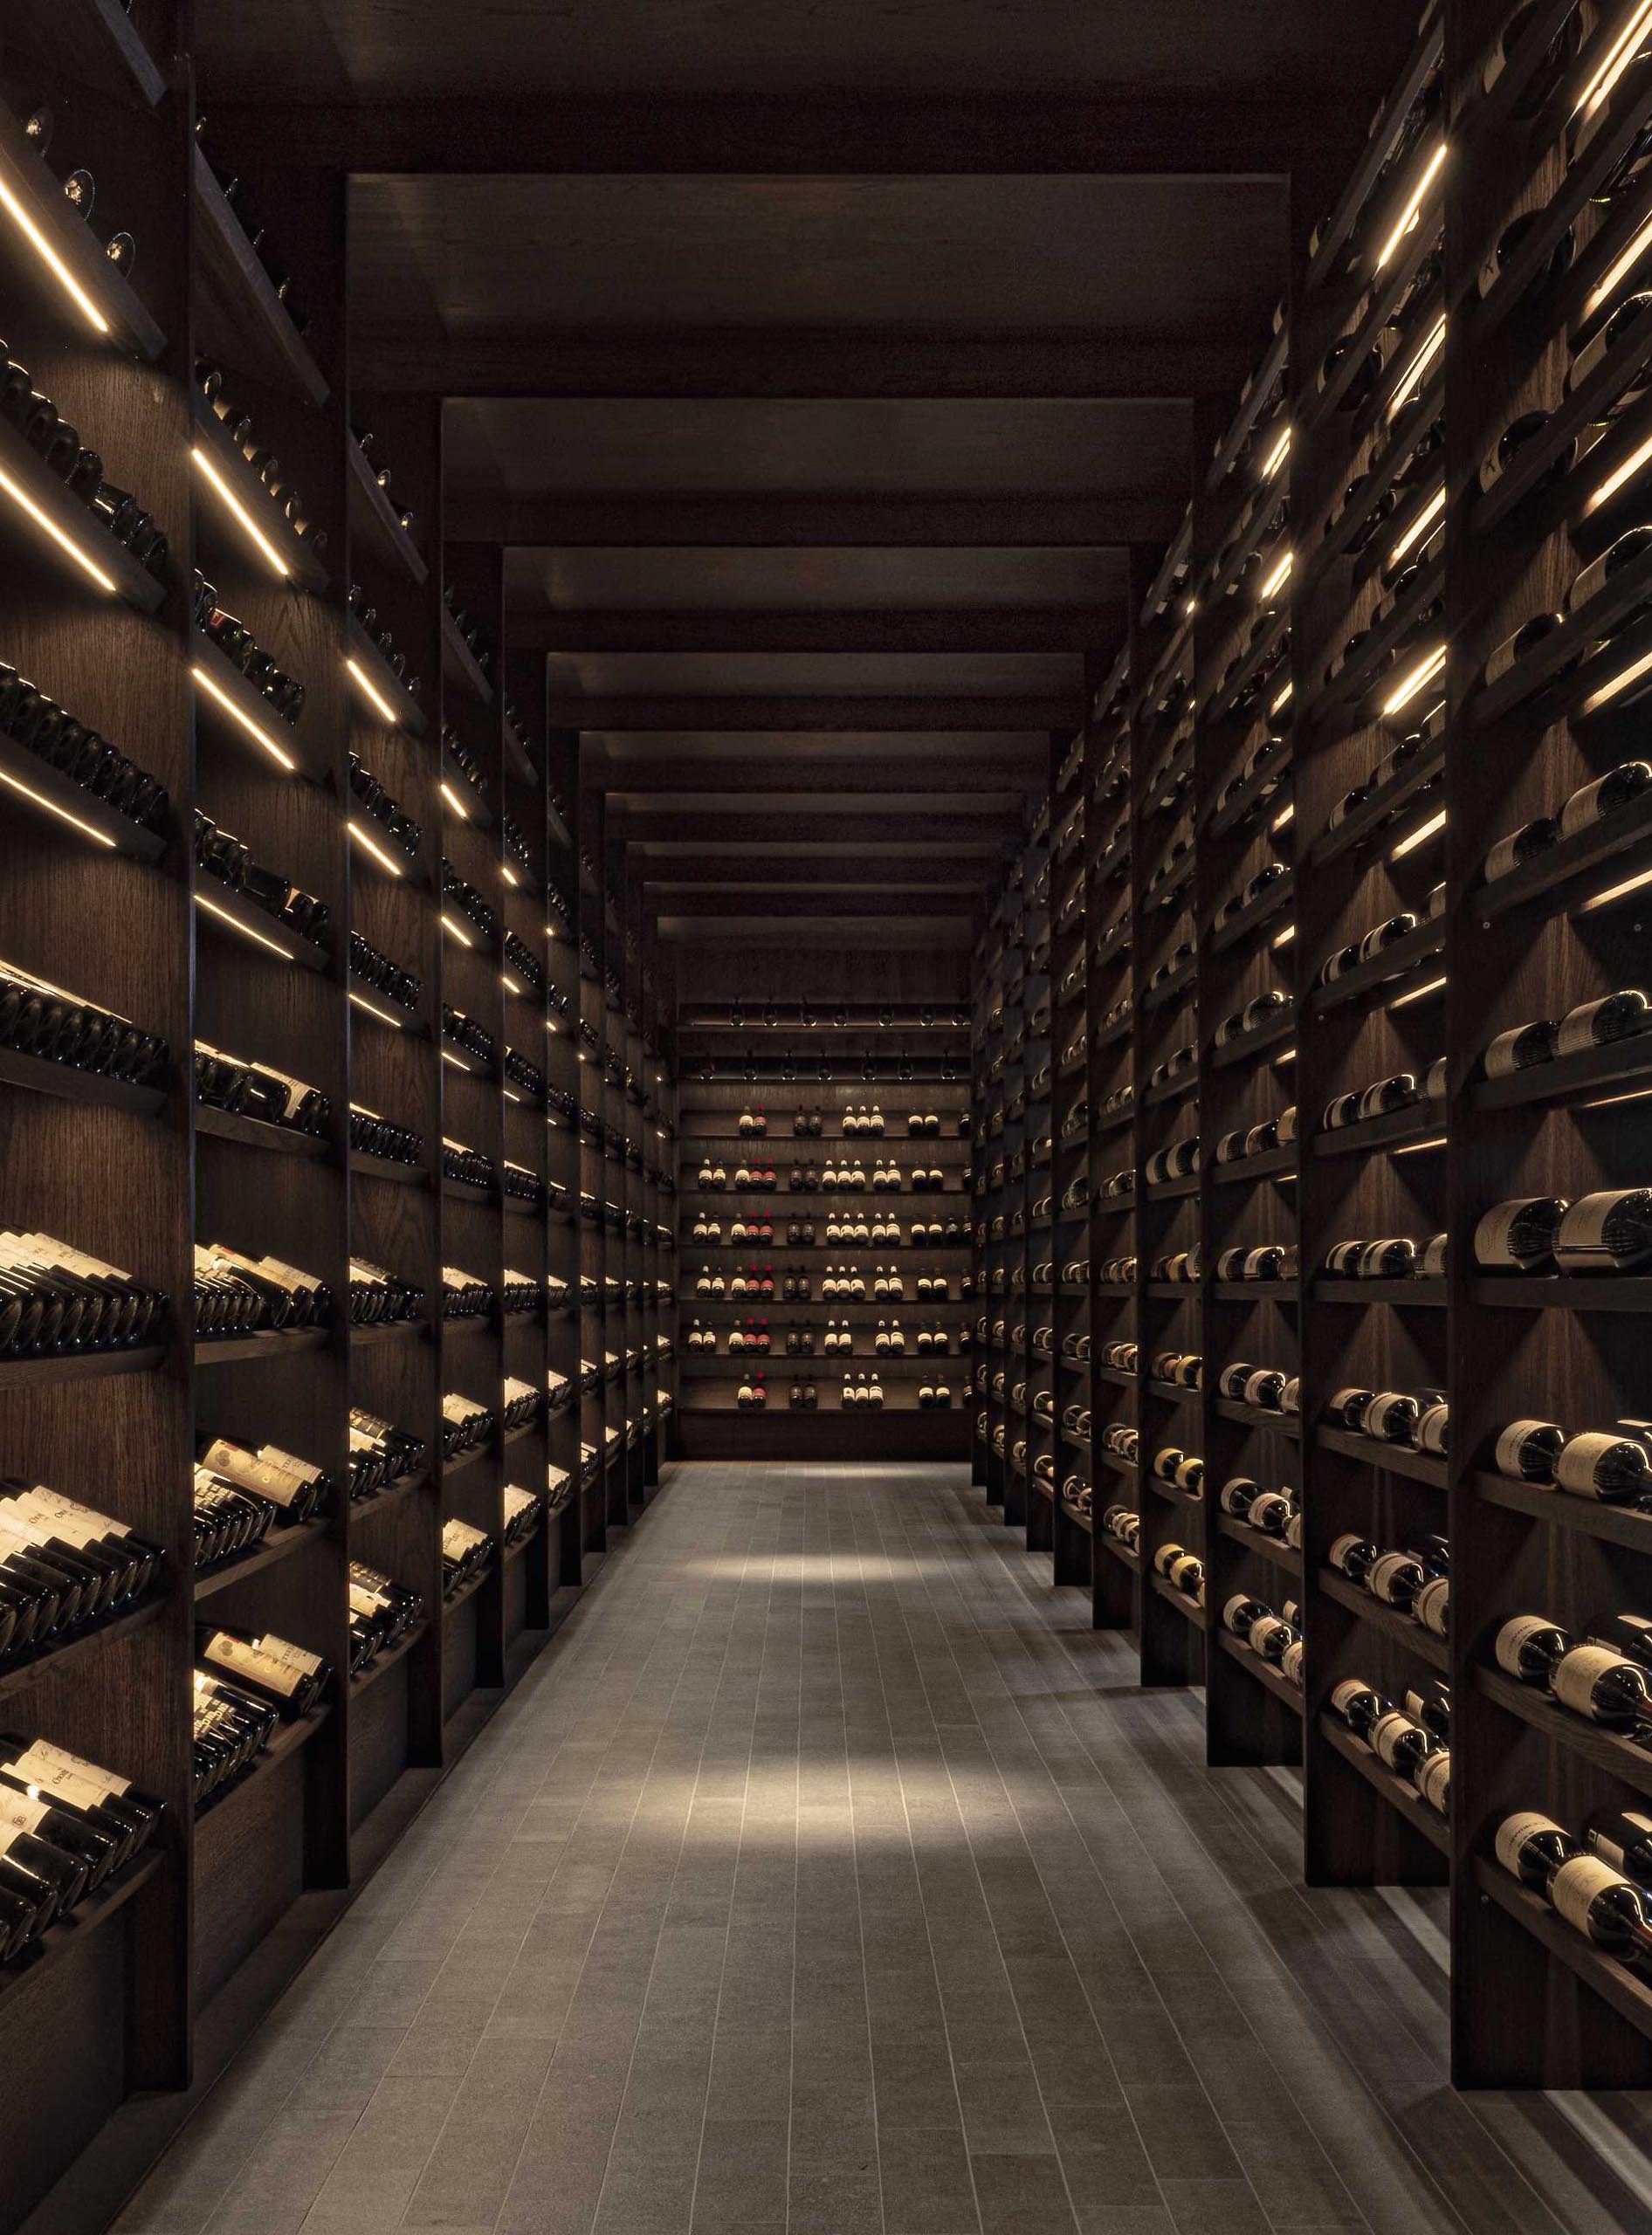 A dark and moody wine cellar with dark wood shelves.